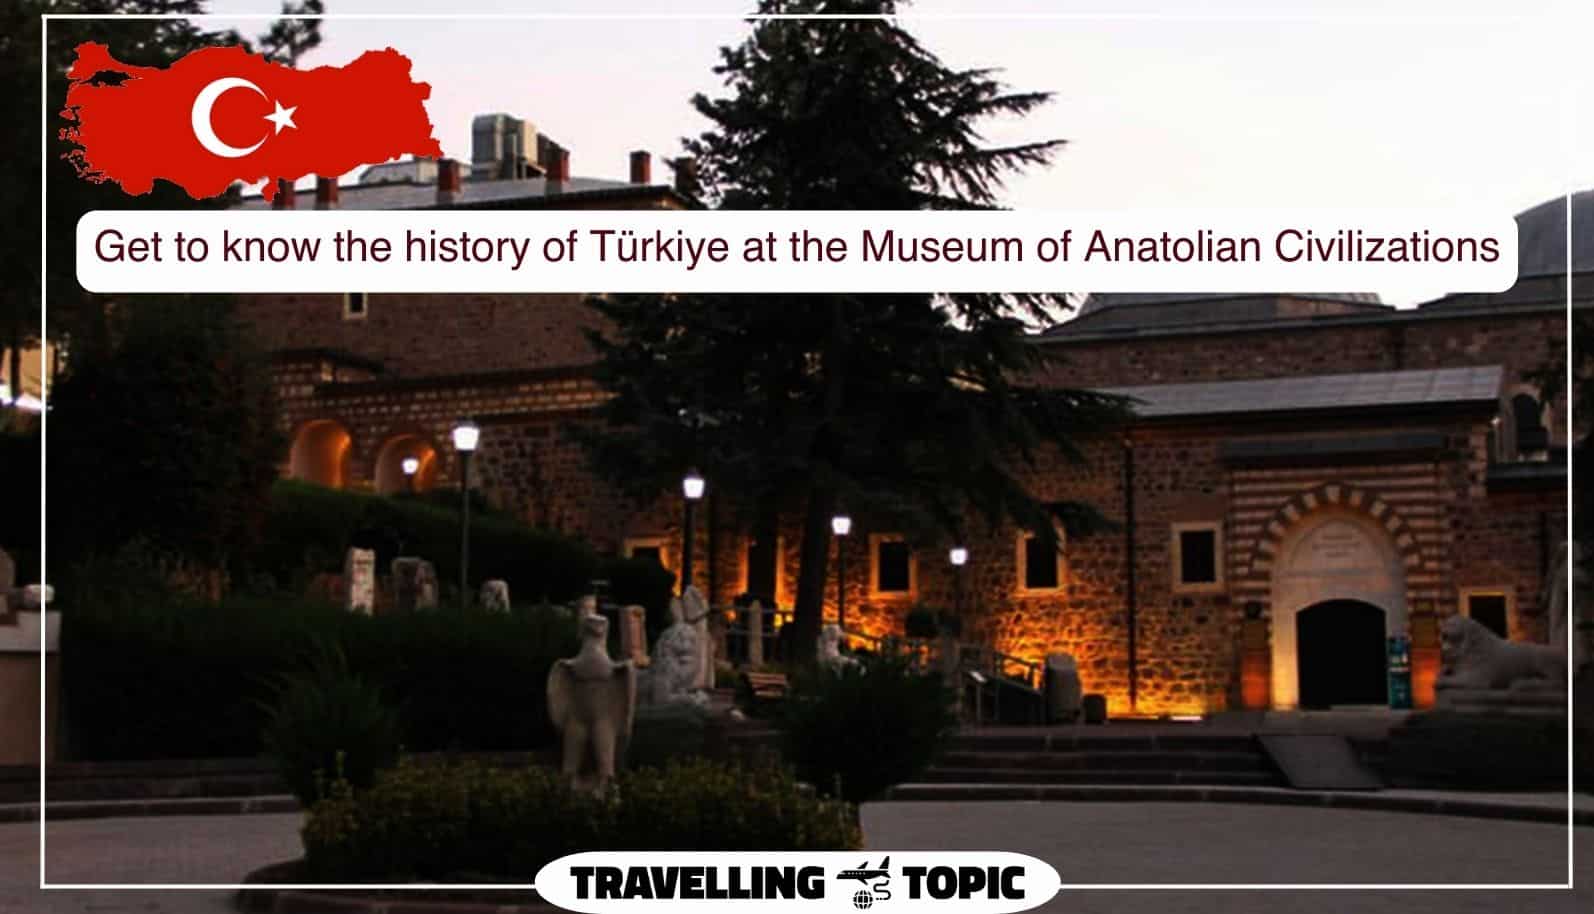 Get to know the history of Türkiye at the Museum of Anatolian Civilizations